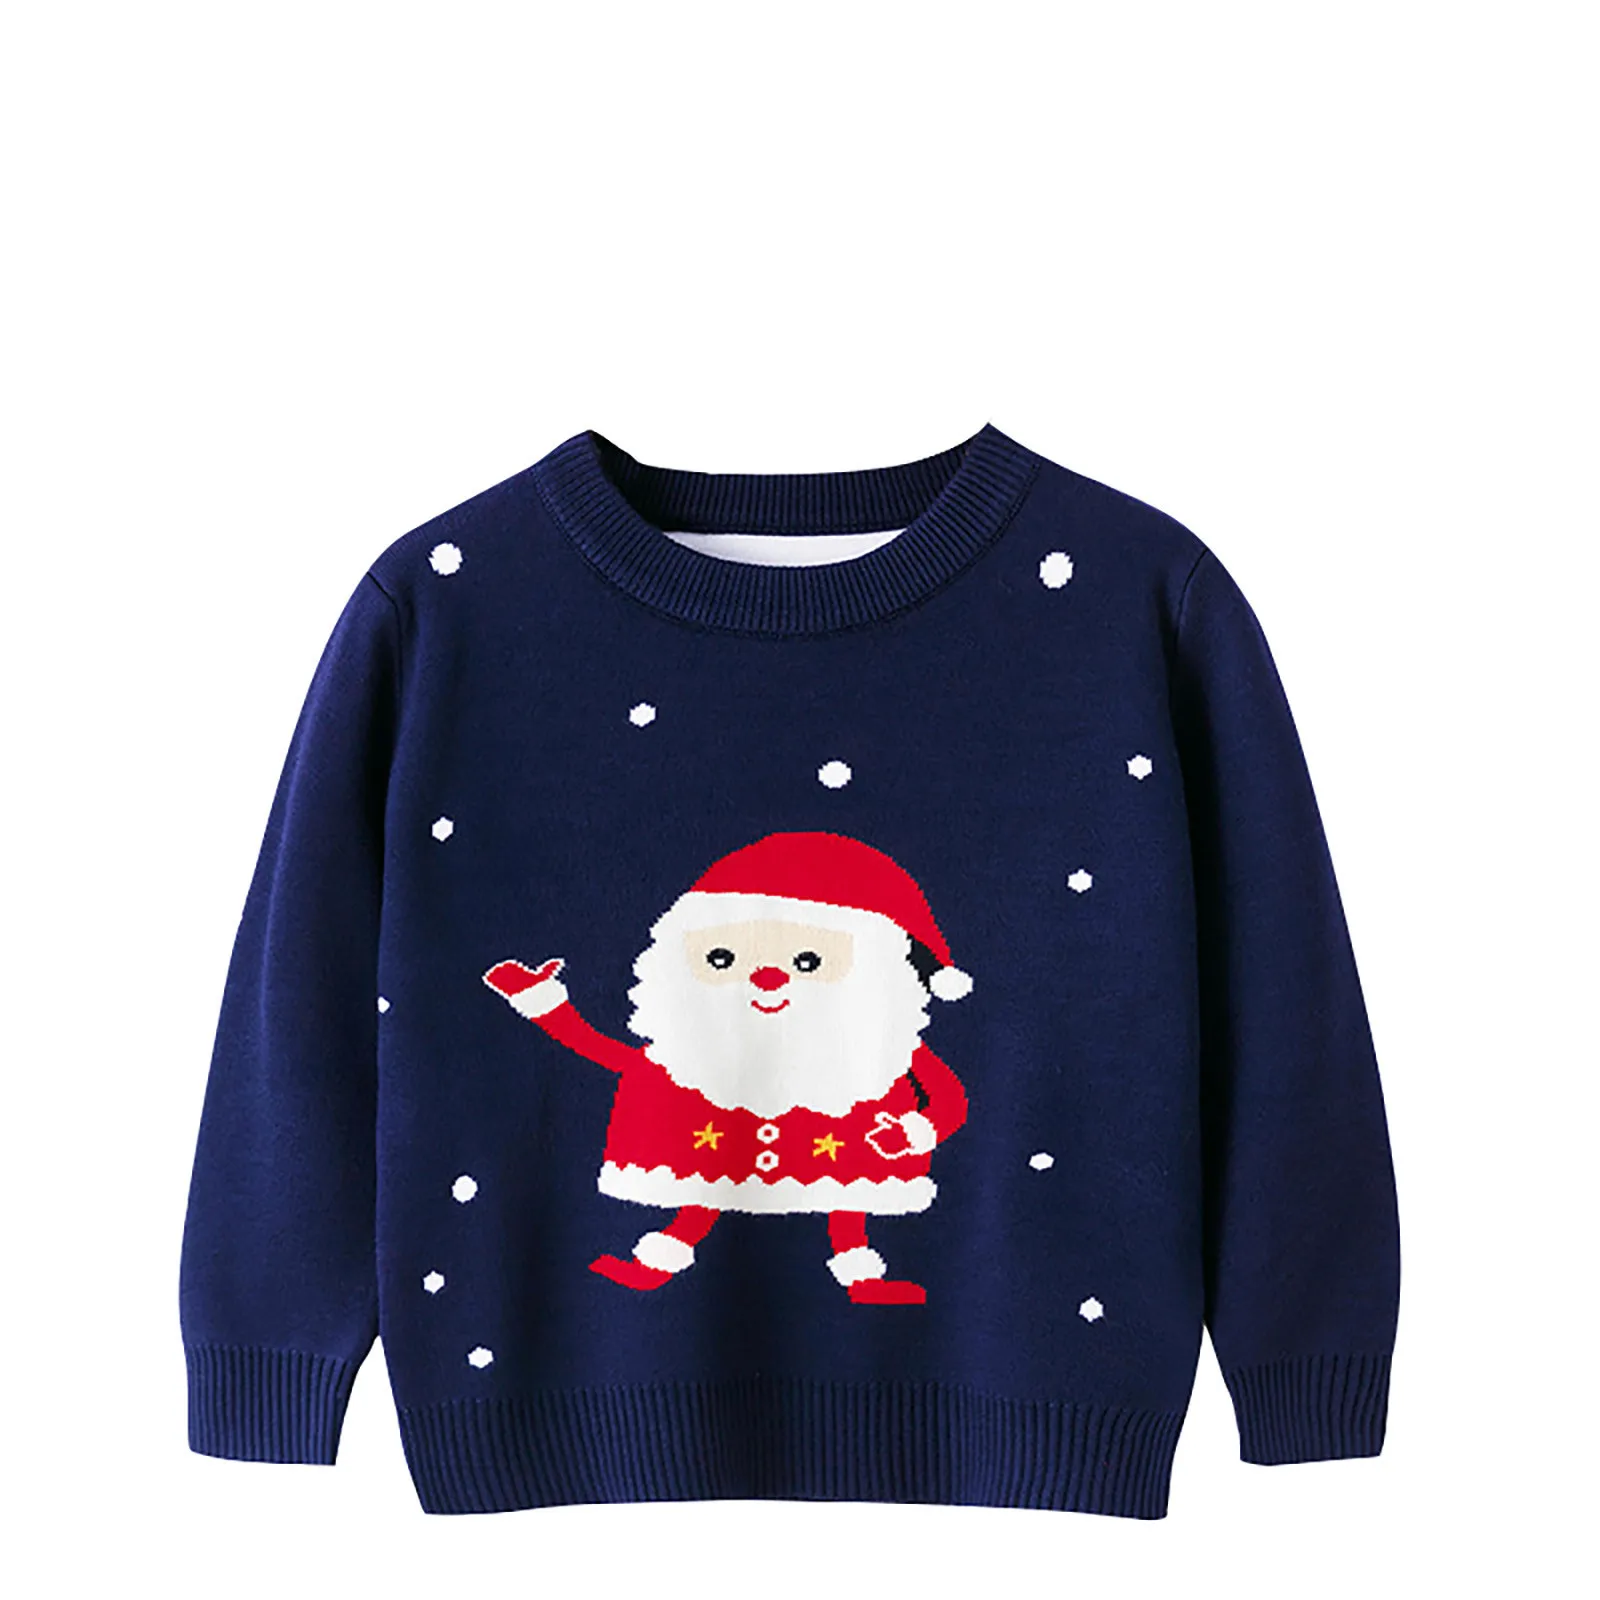 Zerototens Boys Santa Claus Cartoon Printing Sweatshirts Long Sleeve T Shirt Threaded Cuffs Crew-Neck Pullover Toddler Kids Christmas Clothes Casual Cotton Tops Age 1-6 Years